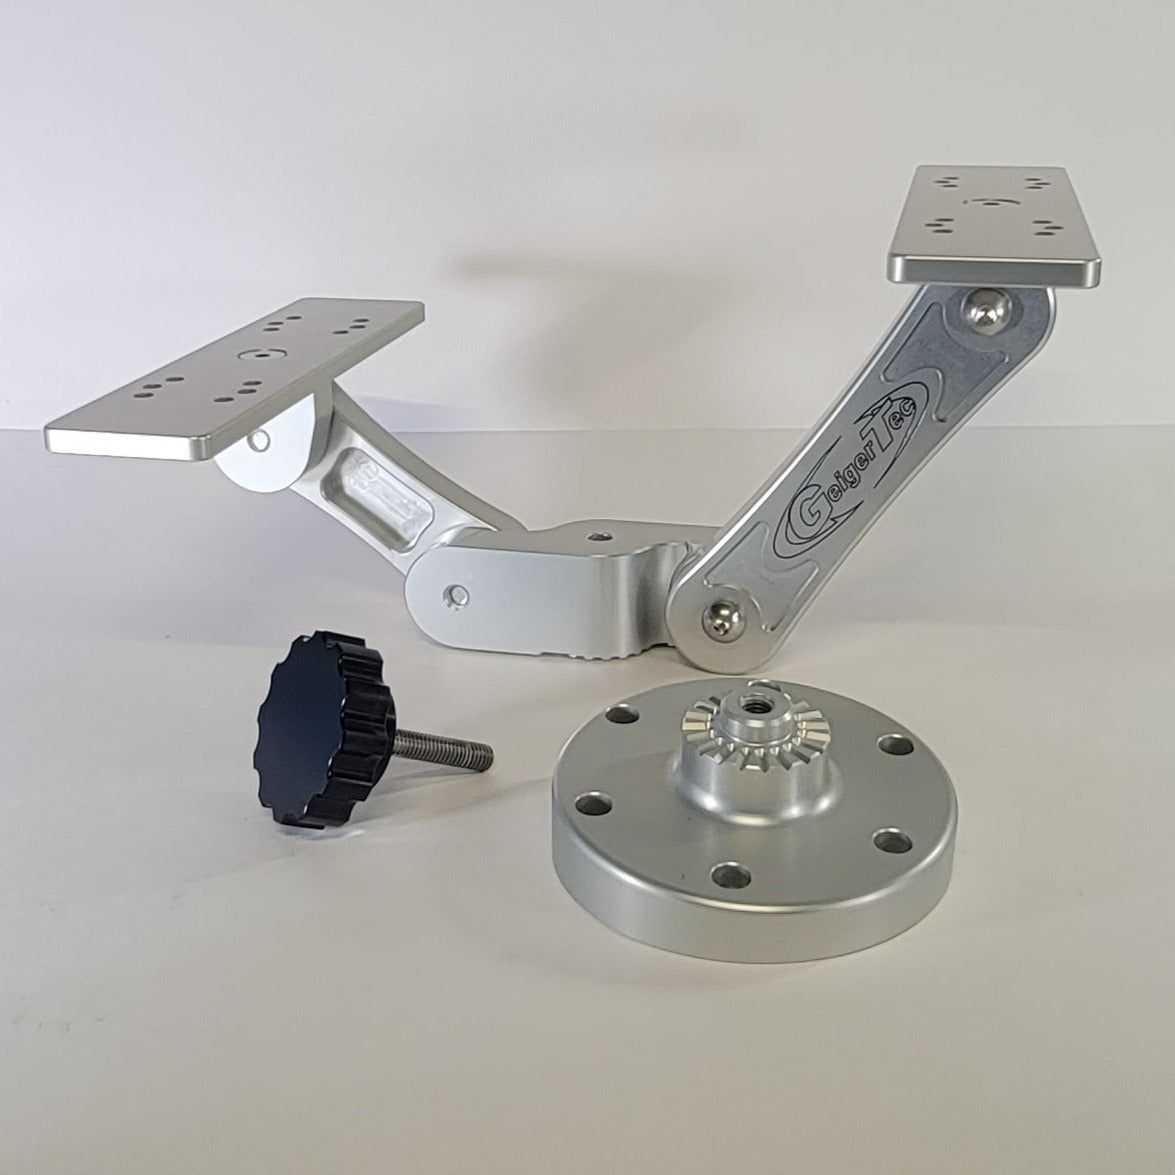 Fishing electronic graph mounts and fish finder mounts for your boat. –  GeigerTec Marine Products